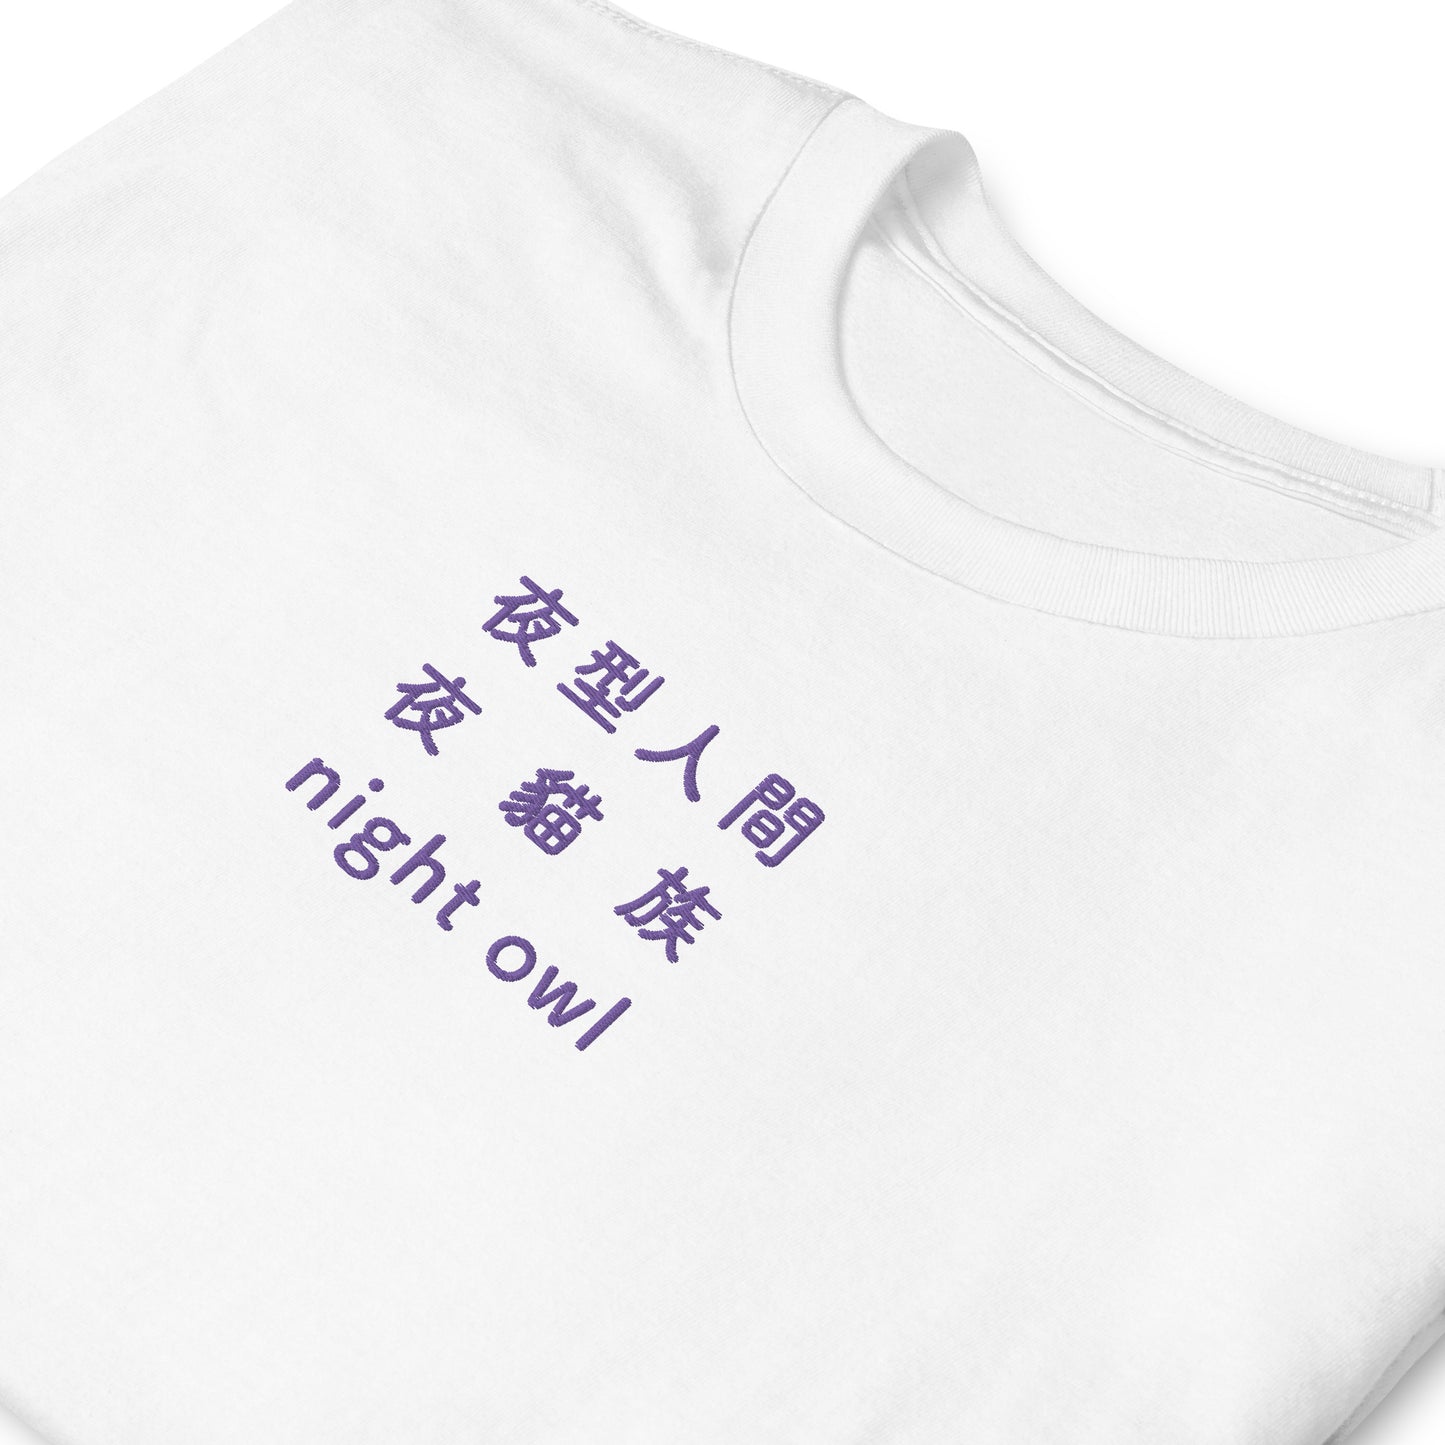 White High Quality Tee - Front Design with an Purple Embroidery "Night Owl" in Japanese,Chinese and English